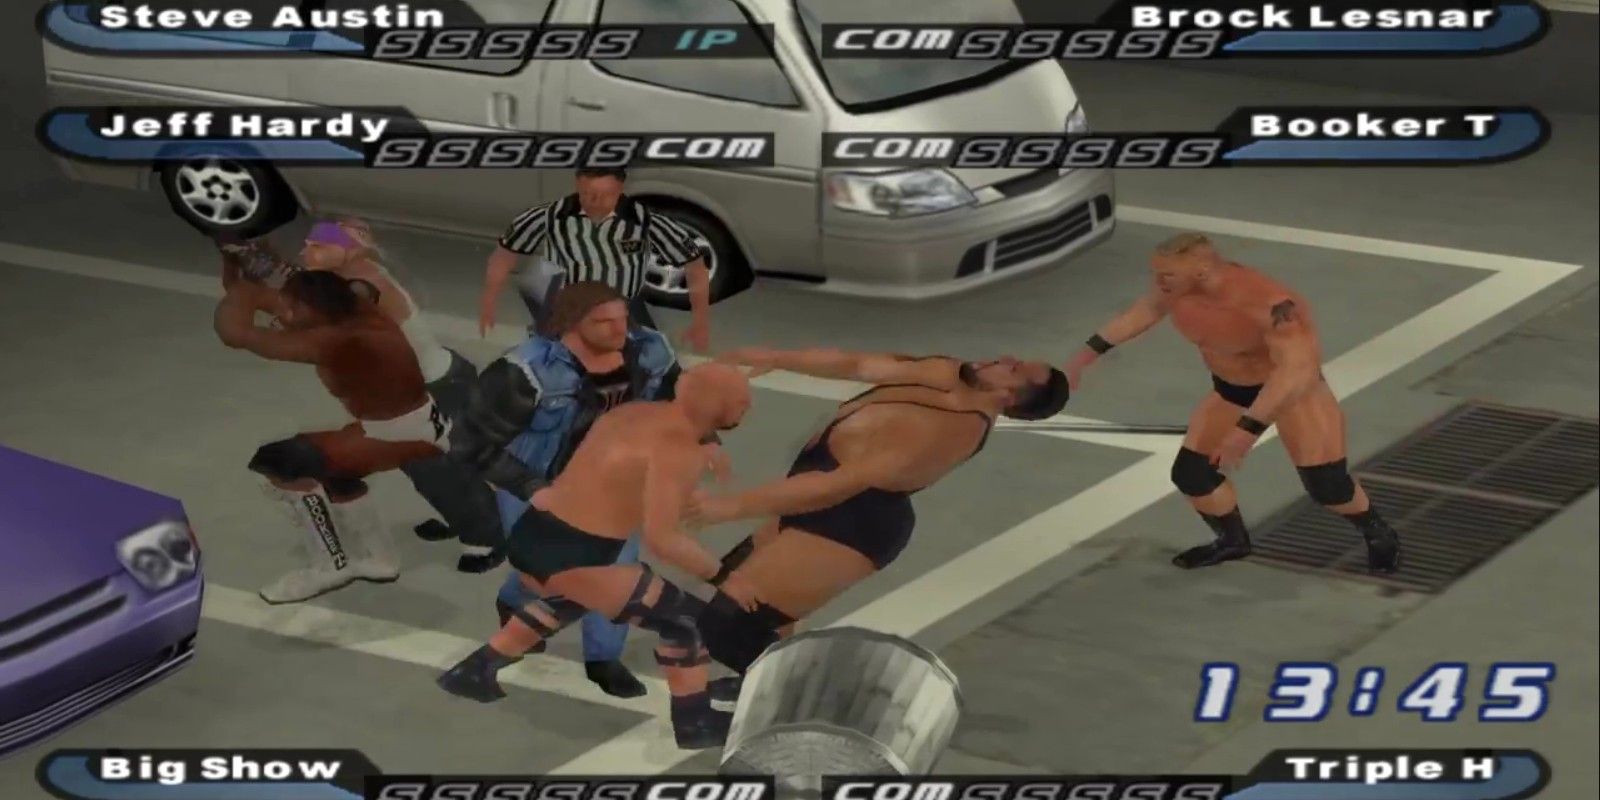 Shut Your Mouth's big backstage brawls embody the wild spirit of old-school WWE games.